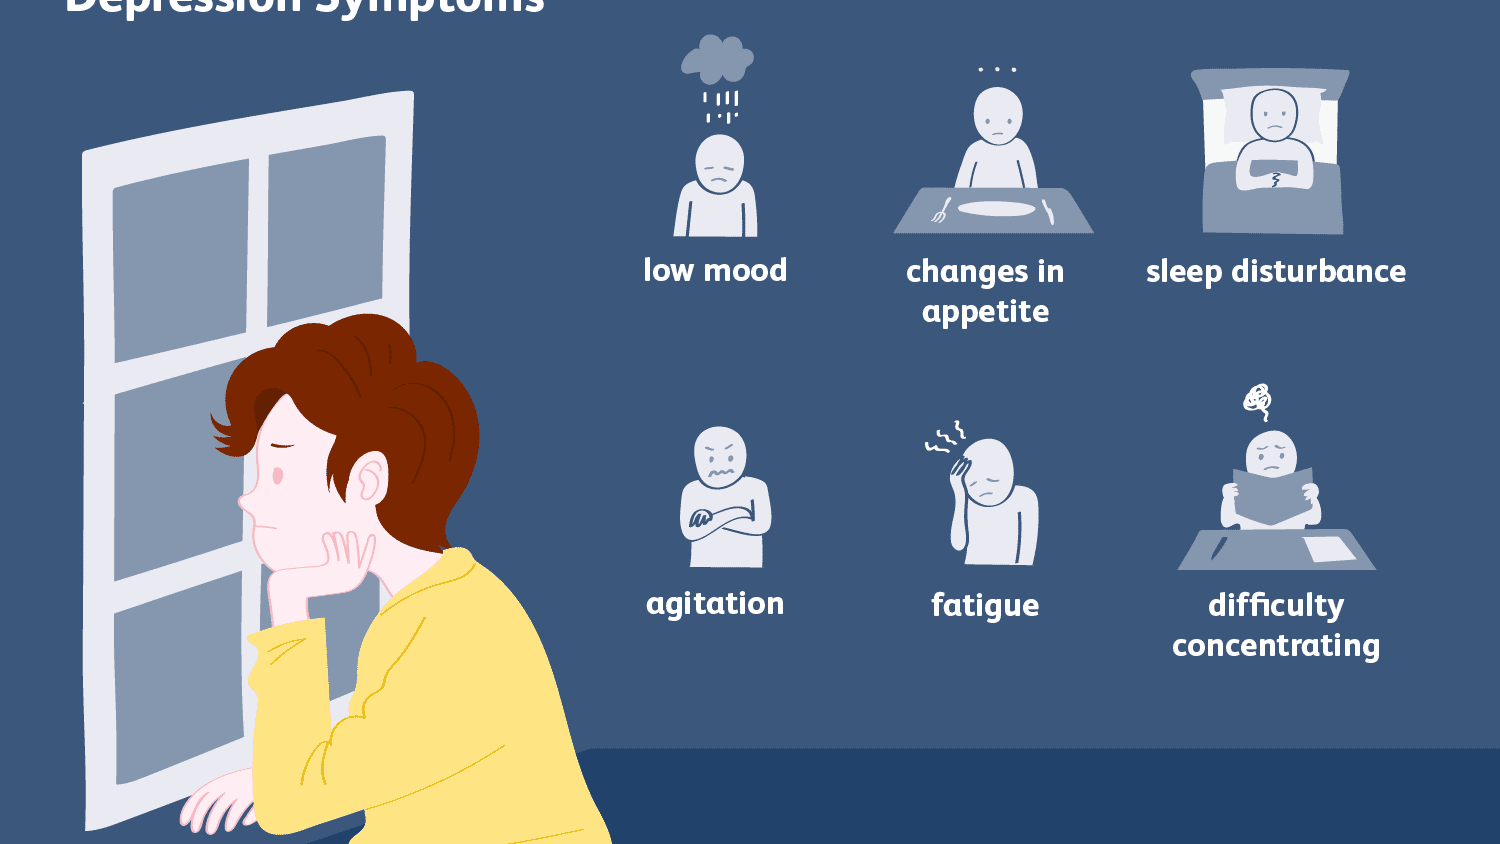 Identifying the Signs of Depression